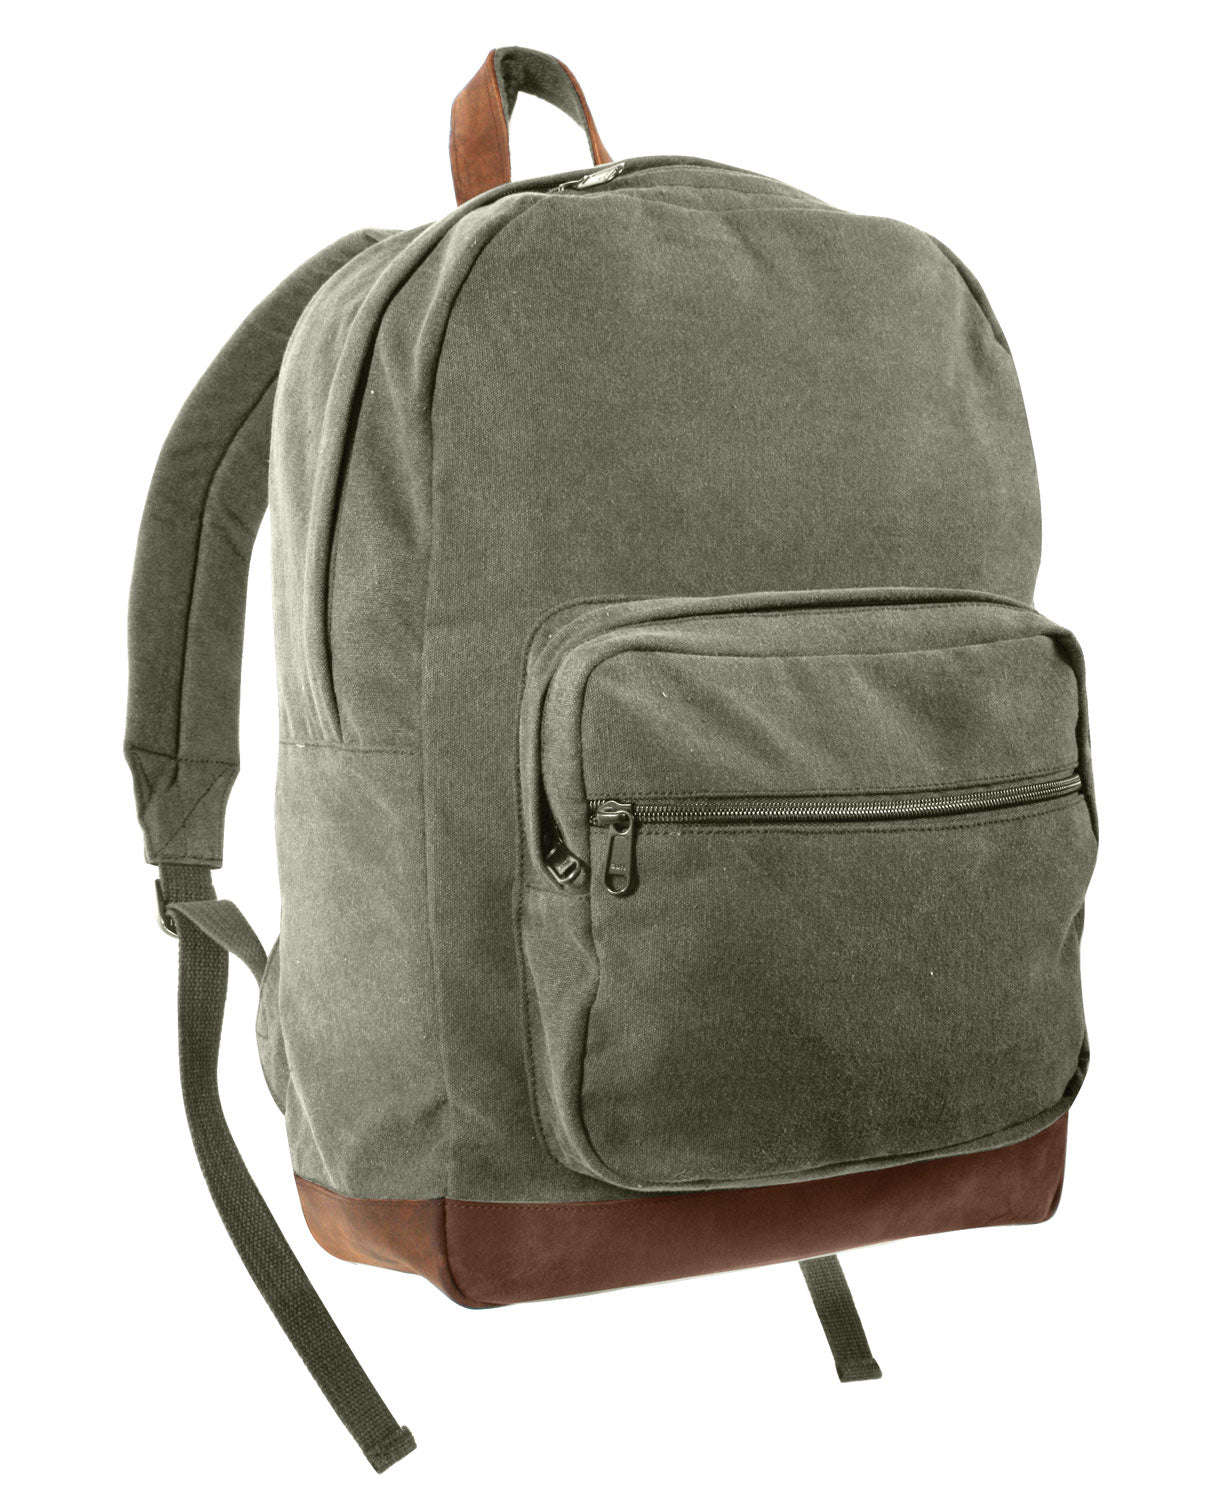 Vintage Canvas Teardrop Backpack With Leather Accents